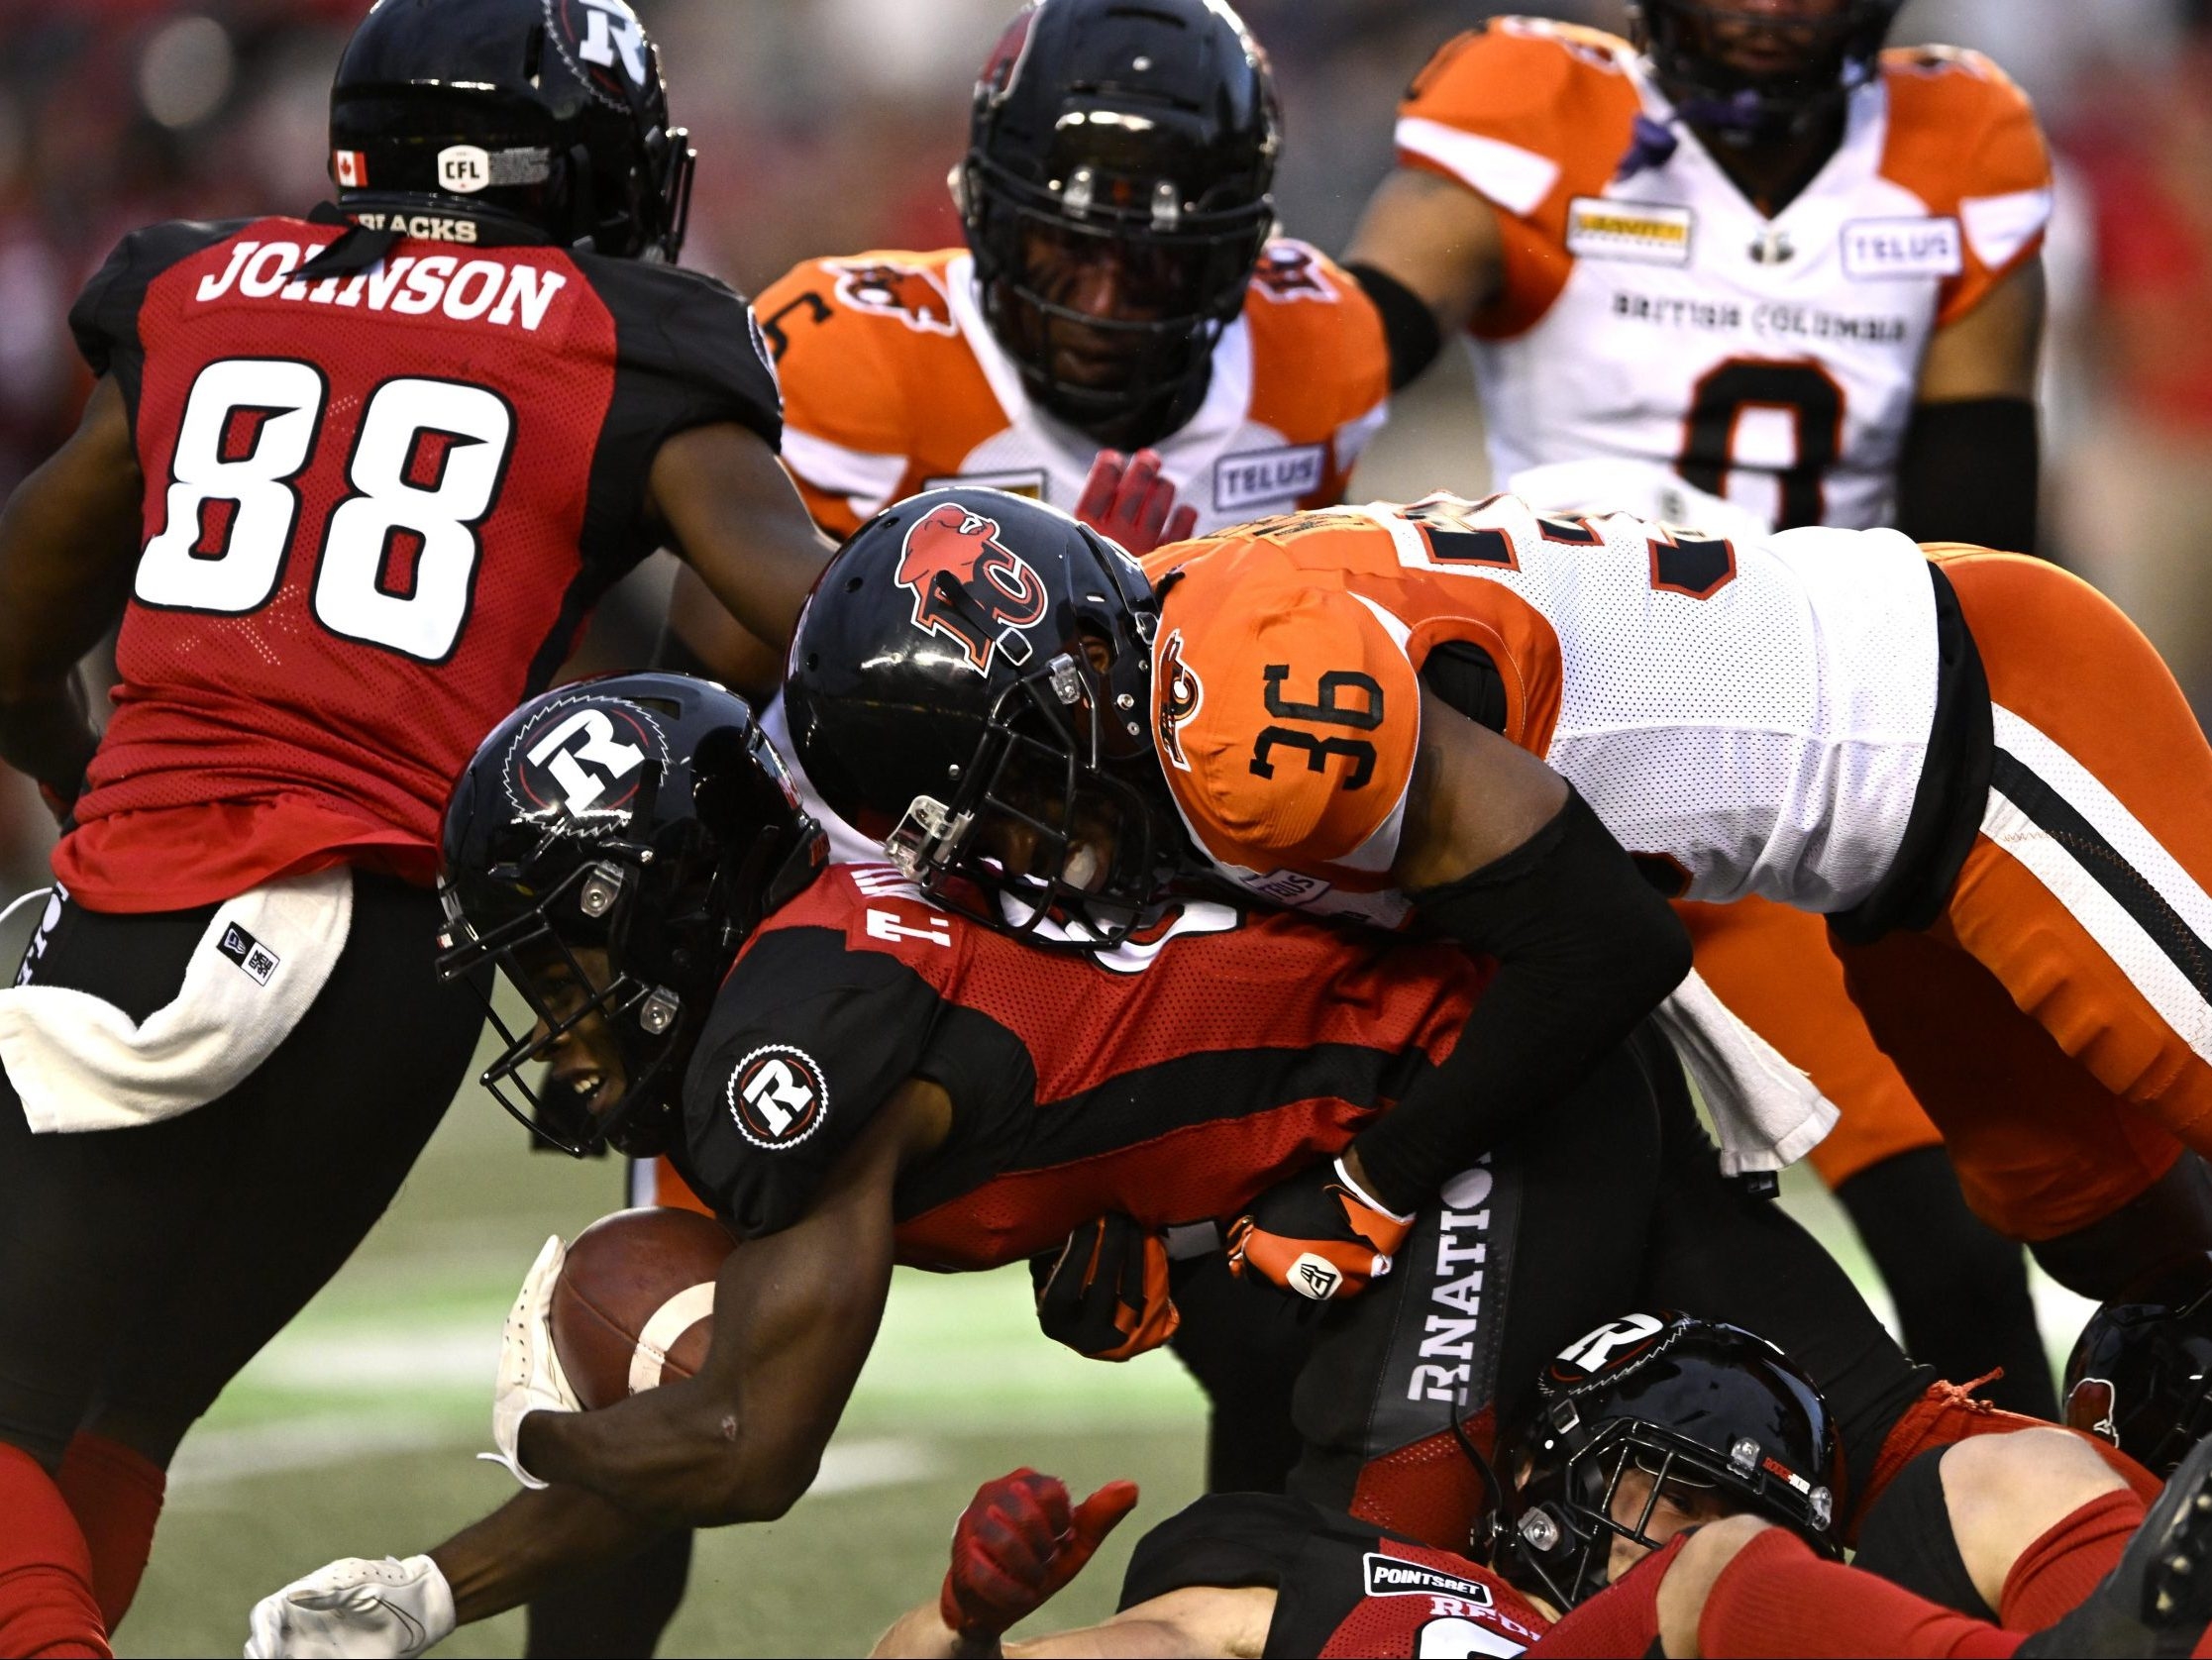 ‘LOSING REALLY SUCKS’: Redblacks do some good things, but mistakes costly in loss to Lions